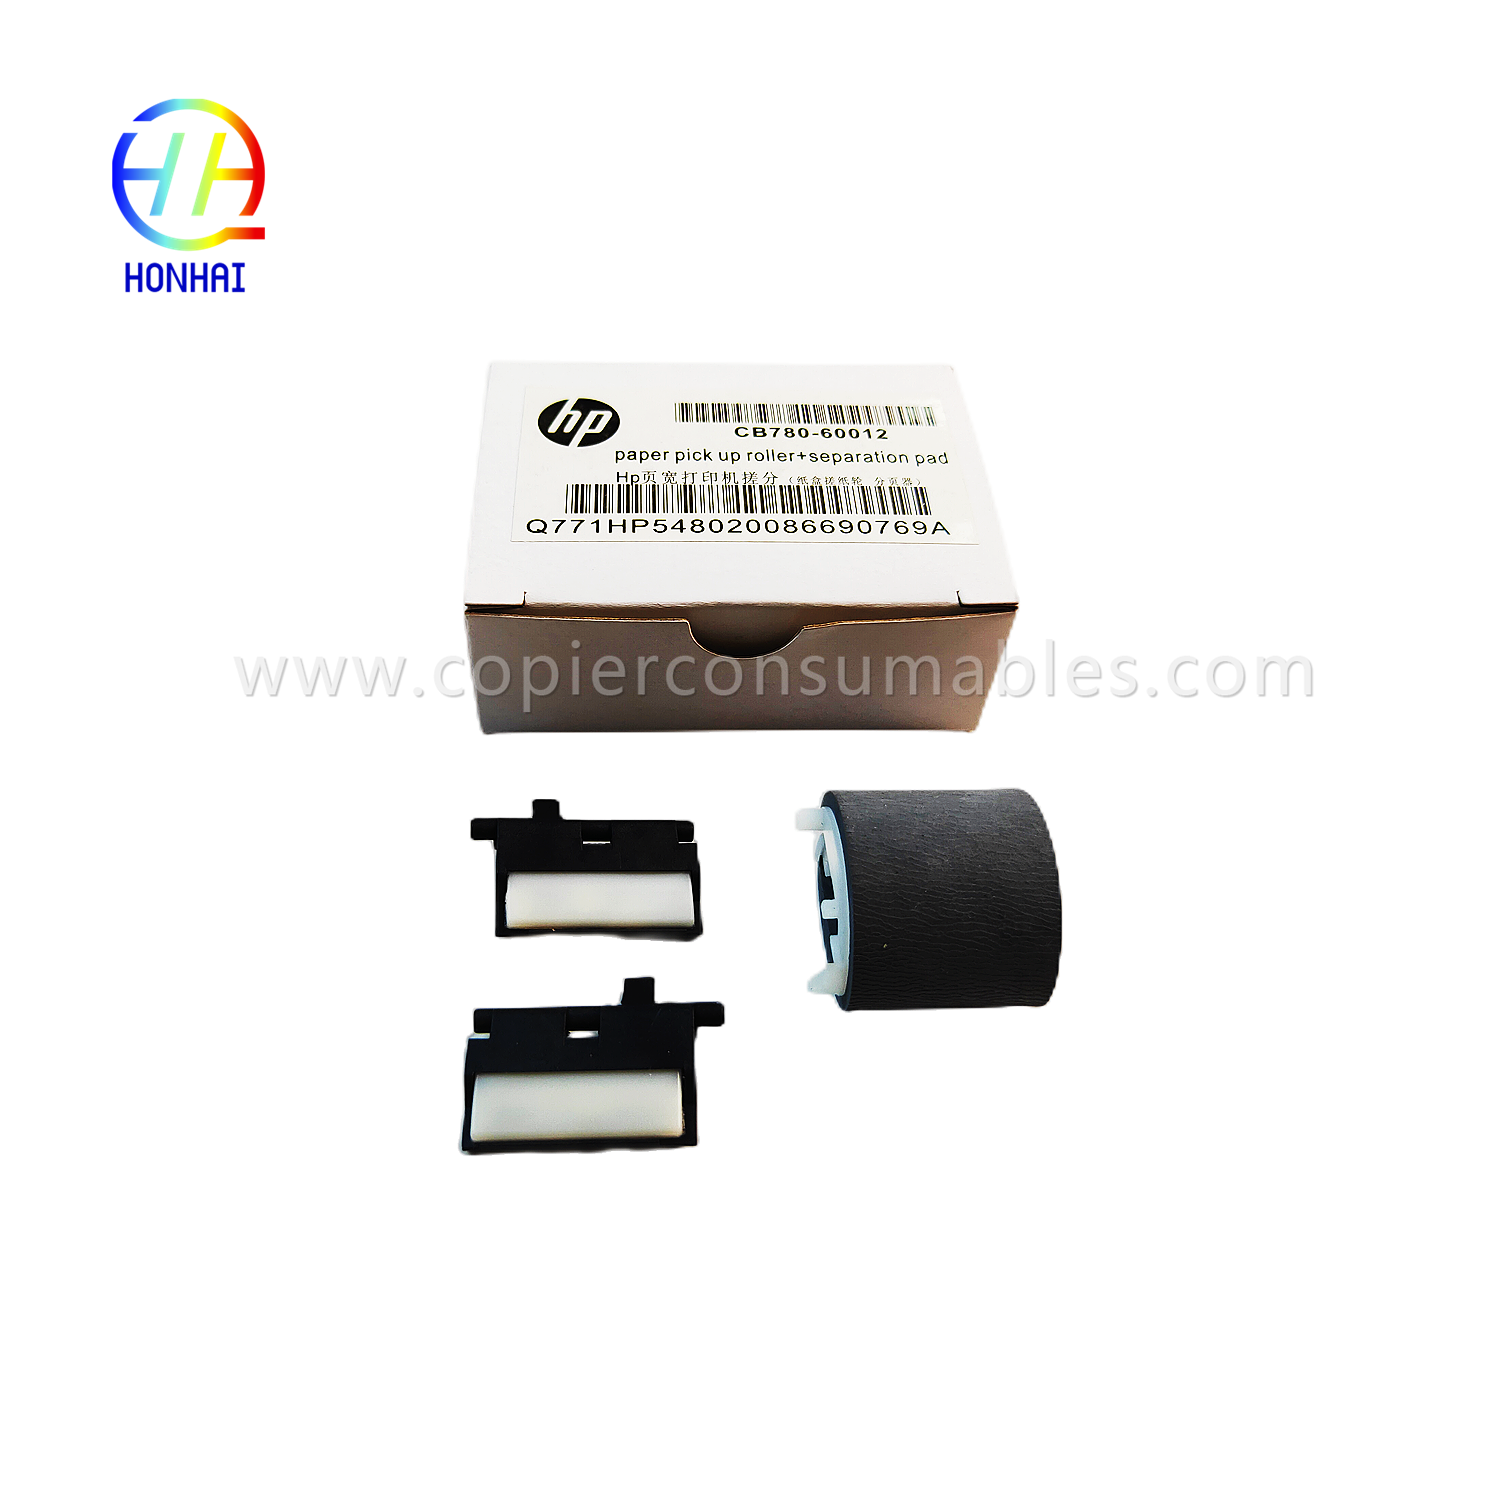 https://www.copierconsumables.com/paper-pickup-roller-separates-pad%ef%bc%88set%ef%bc%89for-hp-pagewide-x585z-x451dn-x476dn-x551dw-x576dw-556dn-586 452dn-477dn-552-577z-cb780-60012-badeeco/